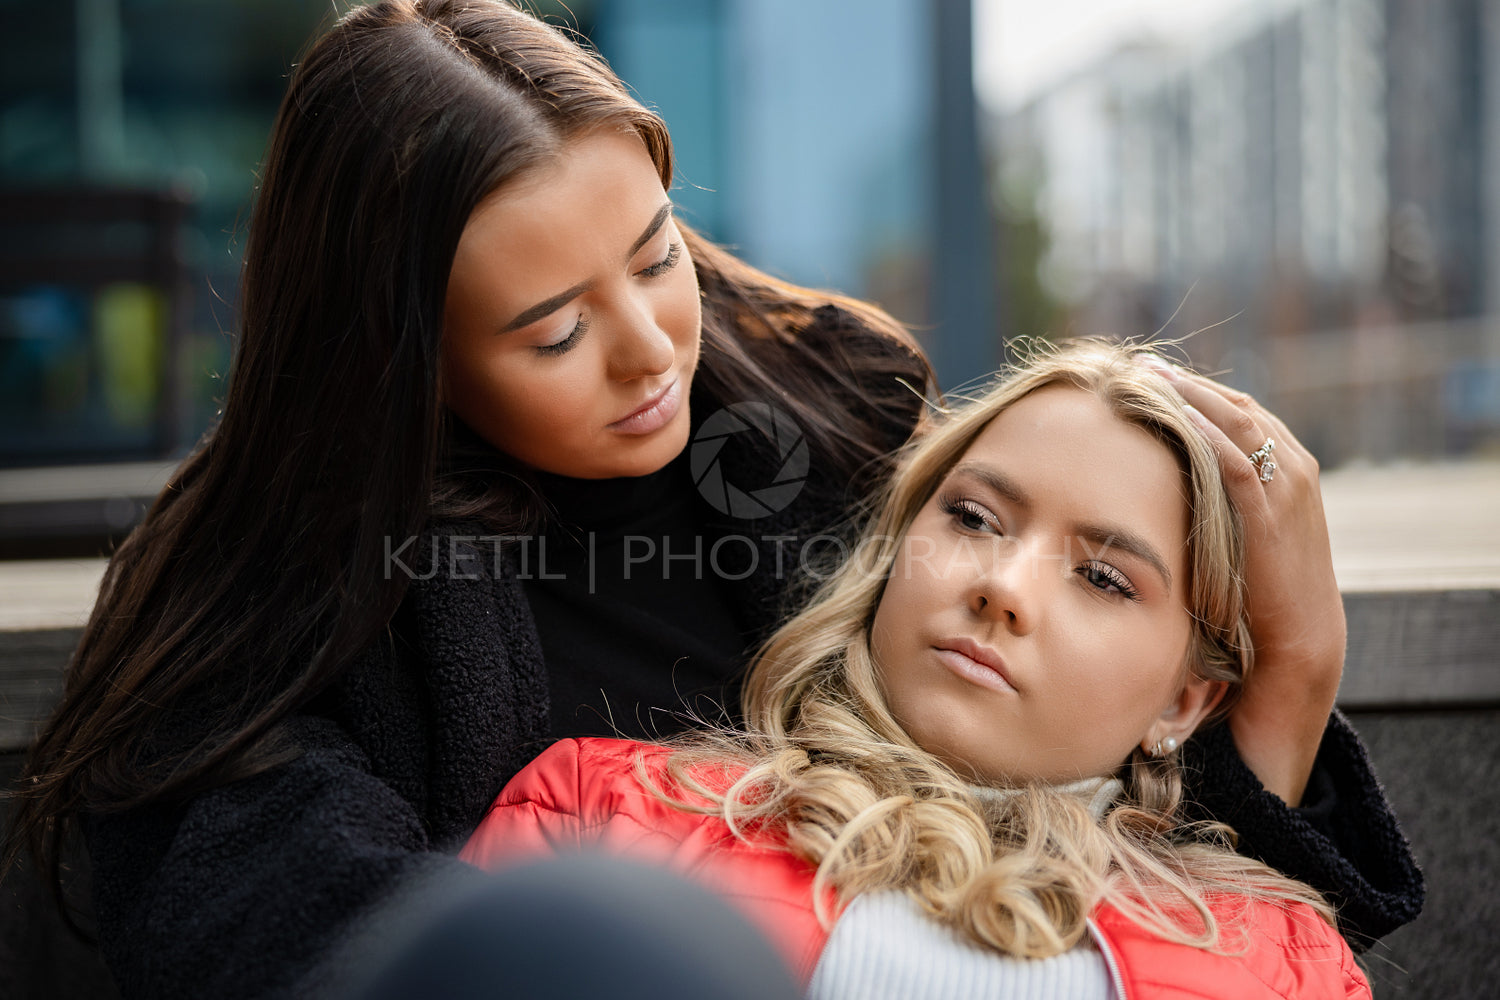 Young Woman Consoling Sad Friend In City